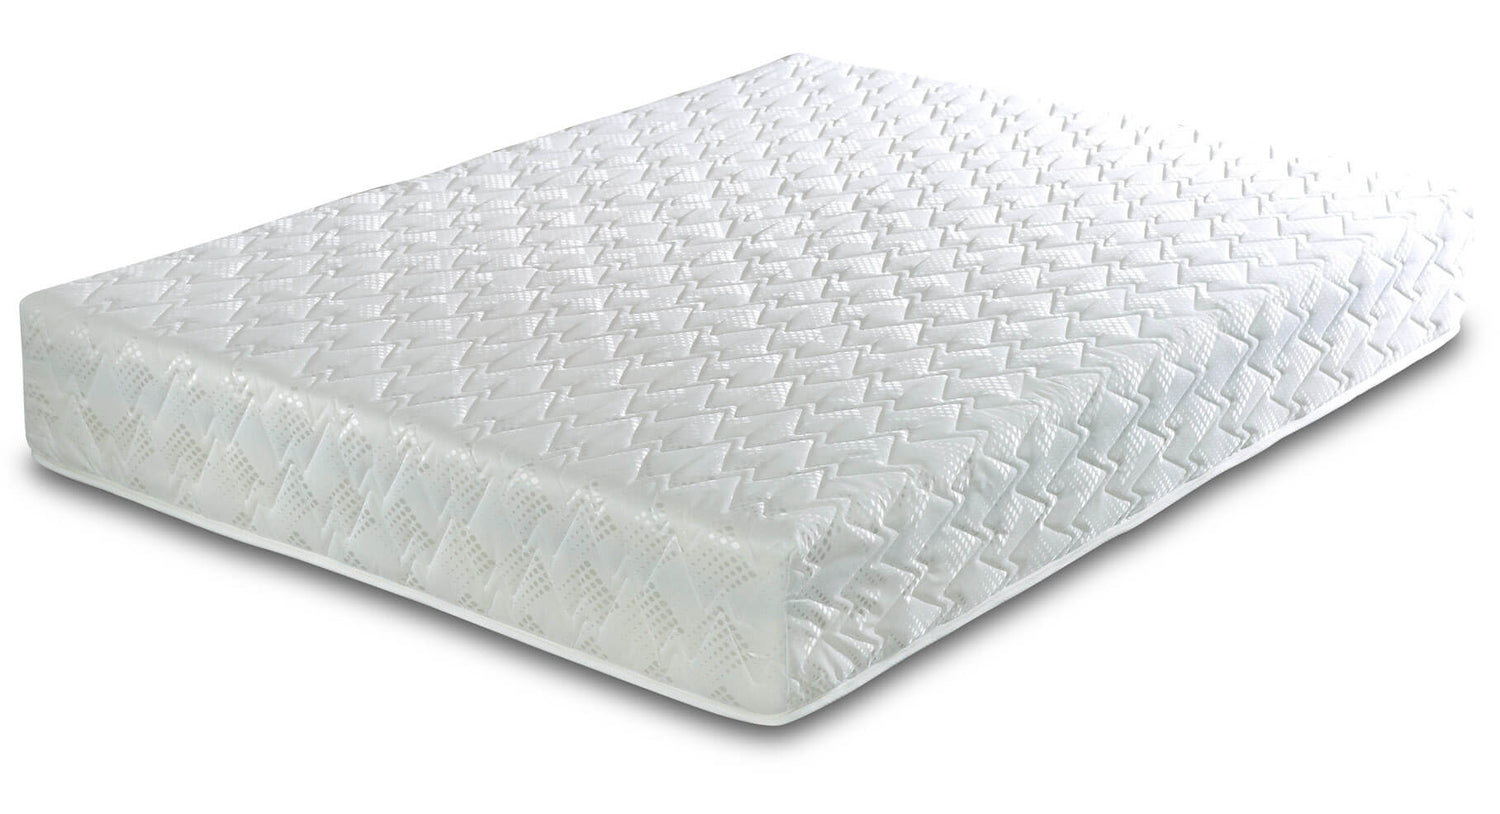 Mark trolleybus bladzijde Visco Therapy Hybrid CoolBlue Coil Mattress - FREE DELIVERY